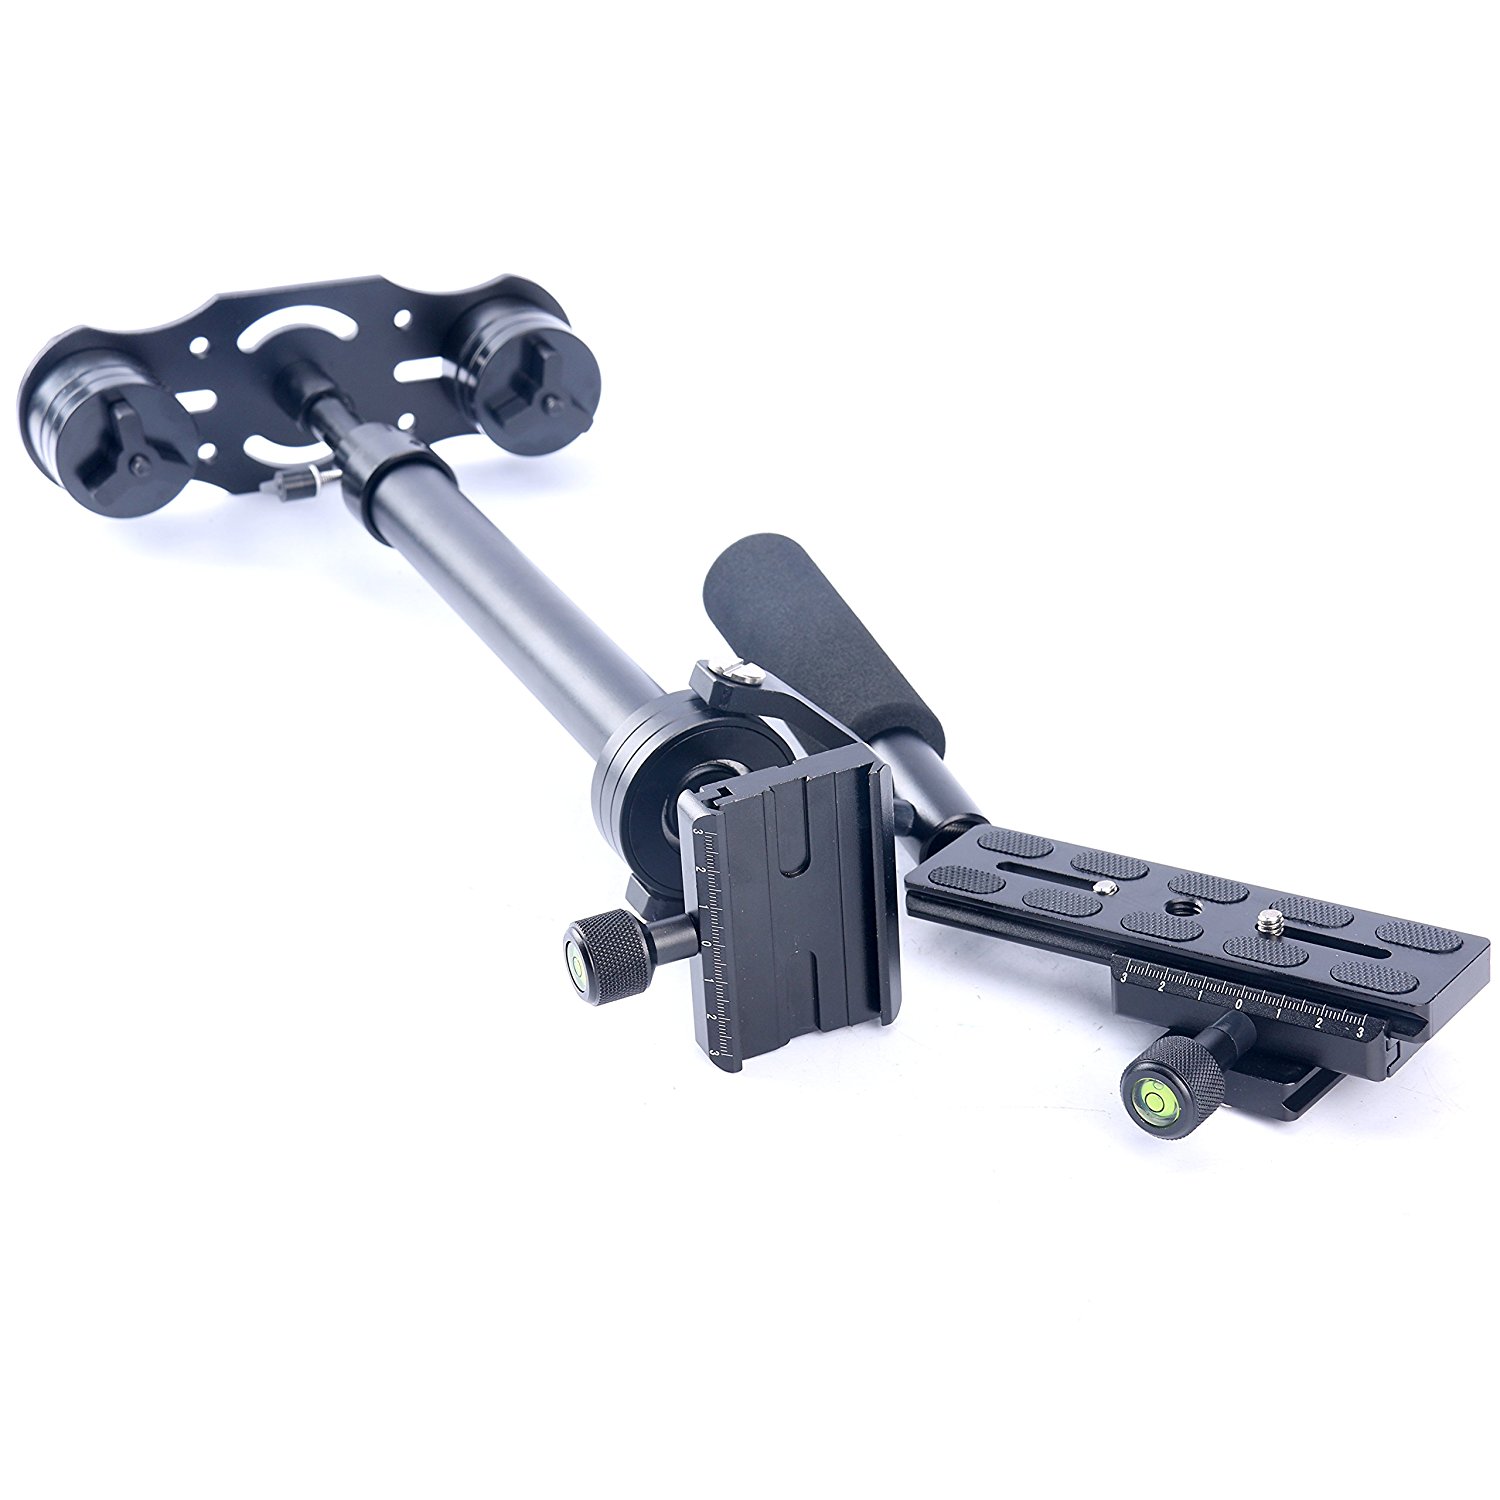 S60 Handheld Steadicam/Camera Stabilizer 24"/60cm with Quick Release Plate DSLR - OMOQOURRMQOPVLOWMRSPTORXXXSXQOUTON4a1l - S60 Handheld Steadicam/Camera Stabilizer 24&#8243;/60cm with Quick Release Plate DSLR